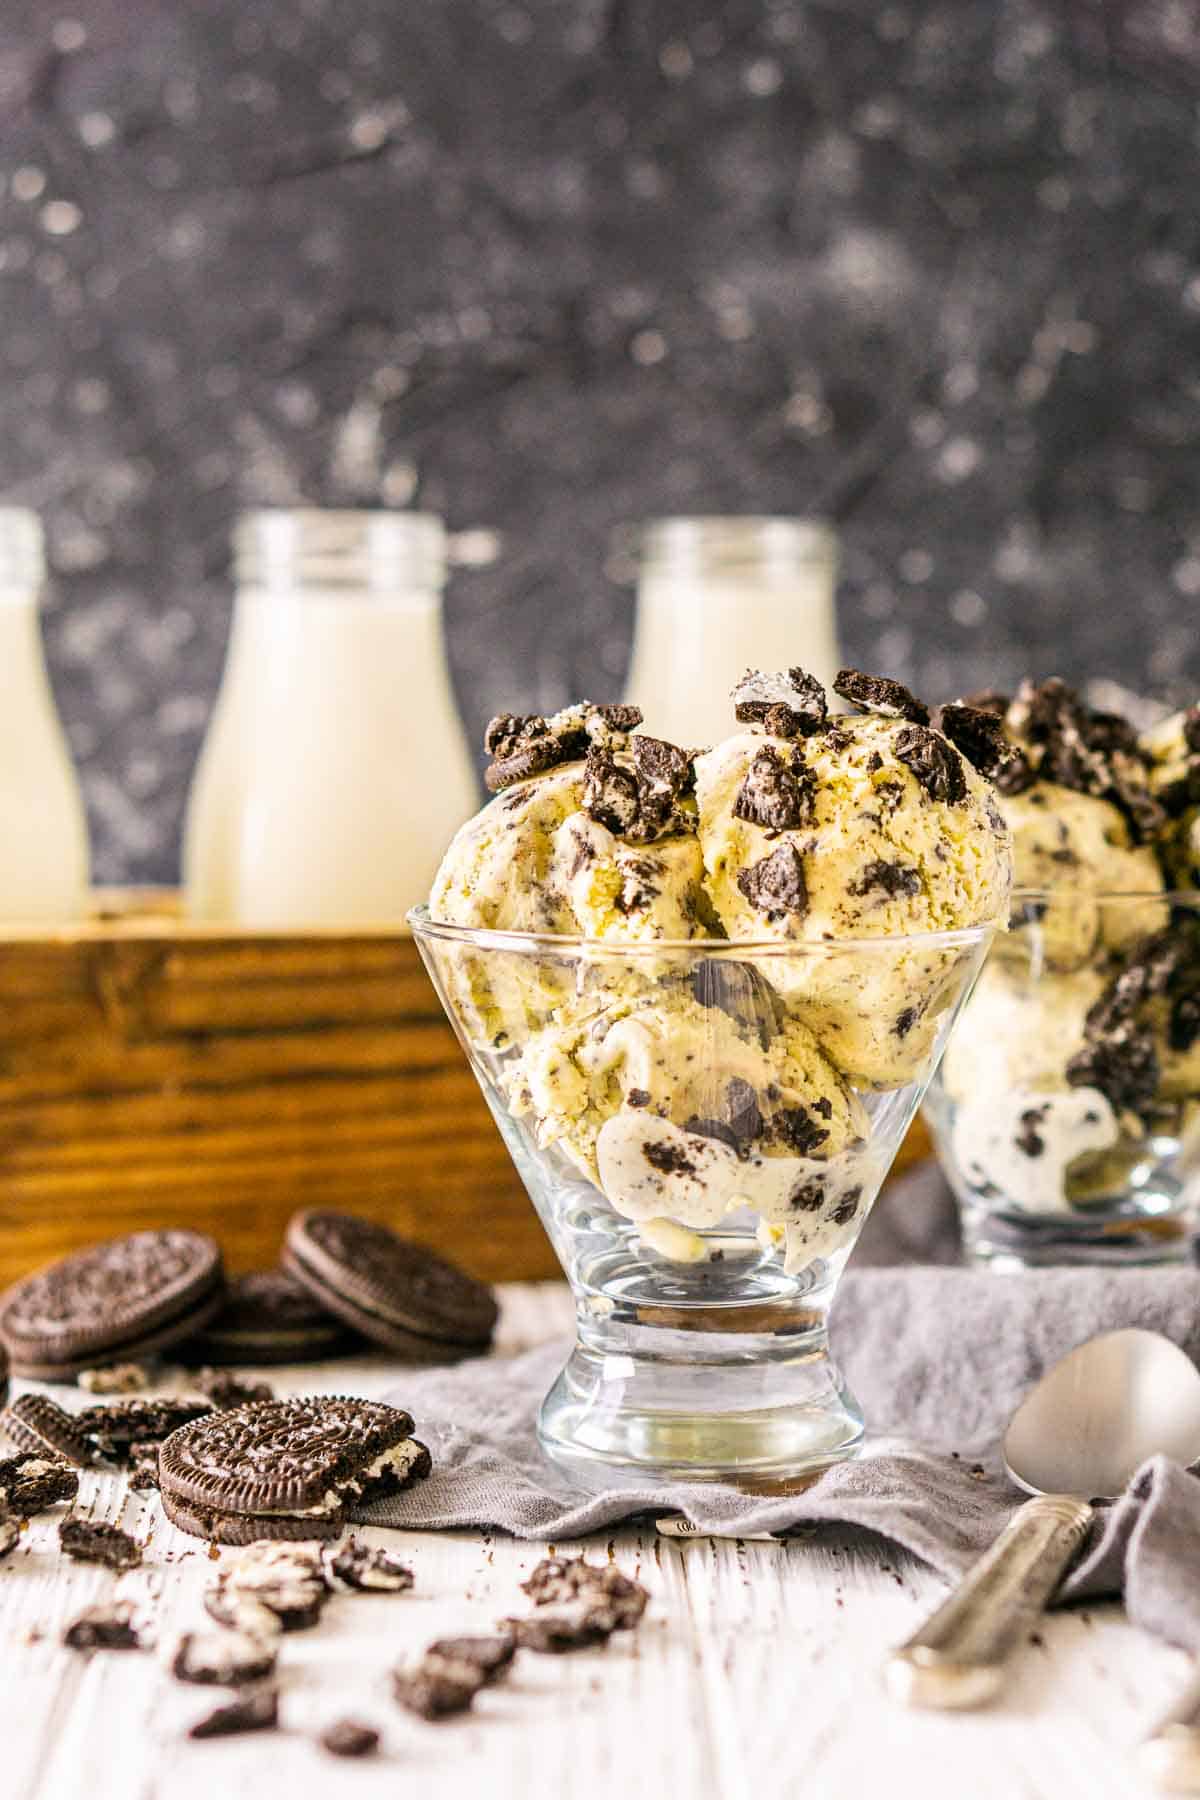 A close-up of the Oreo ice cream on a white wooden surface with milk in the background and crushed cookies around it.